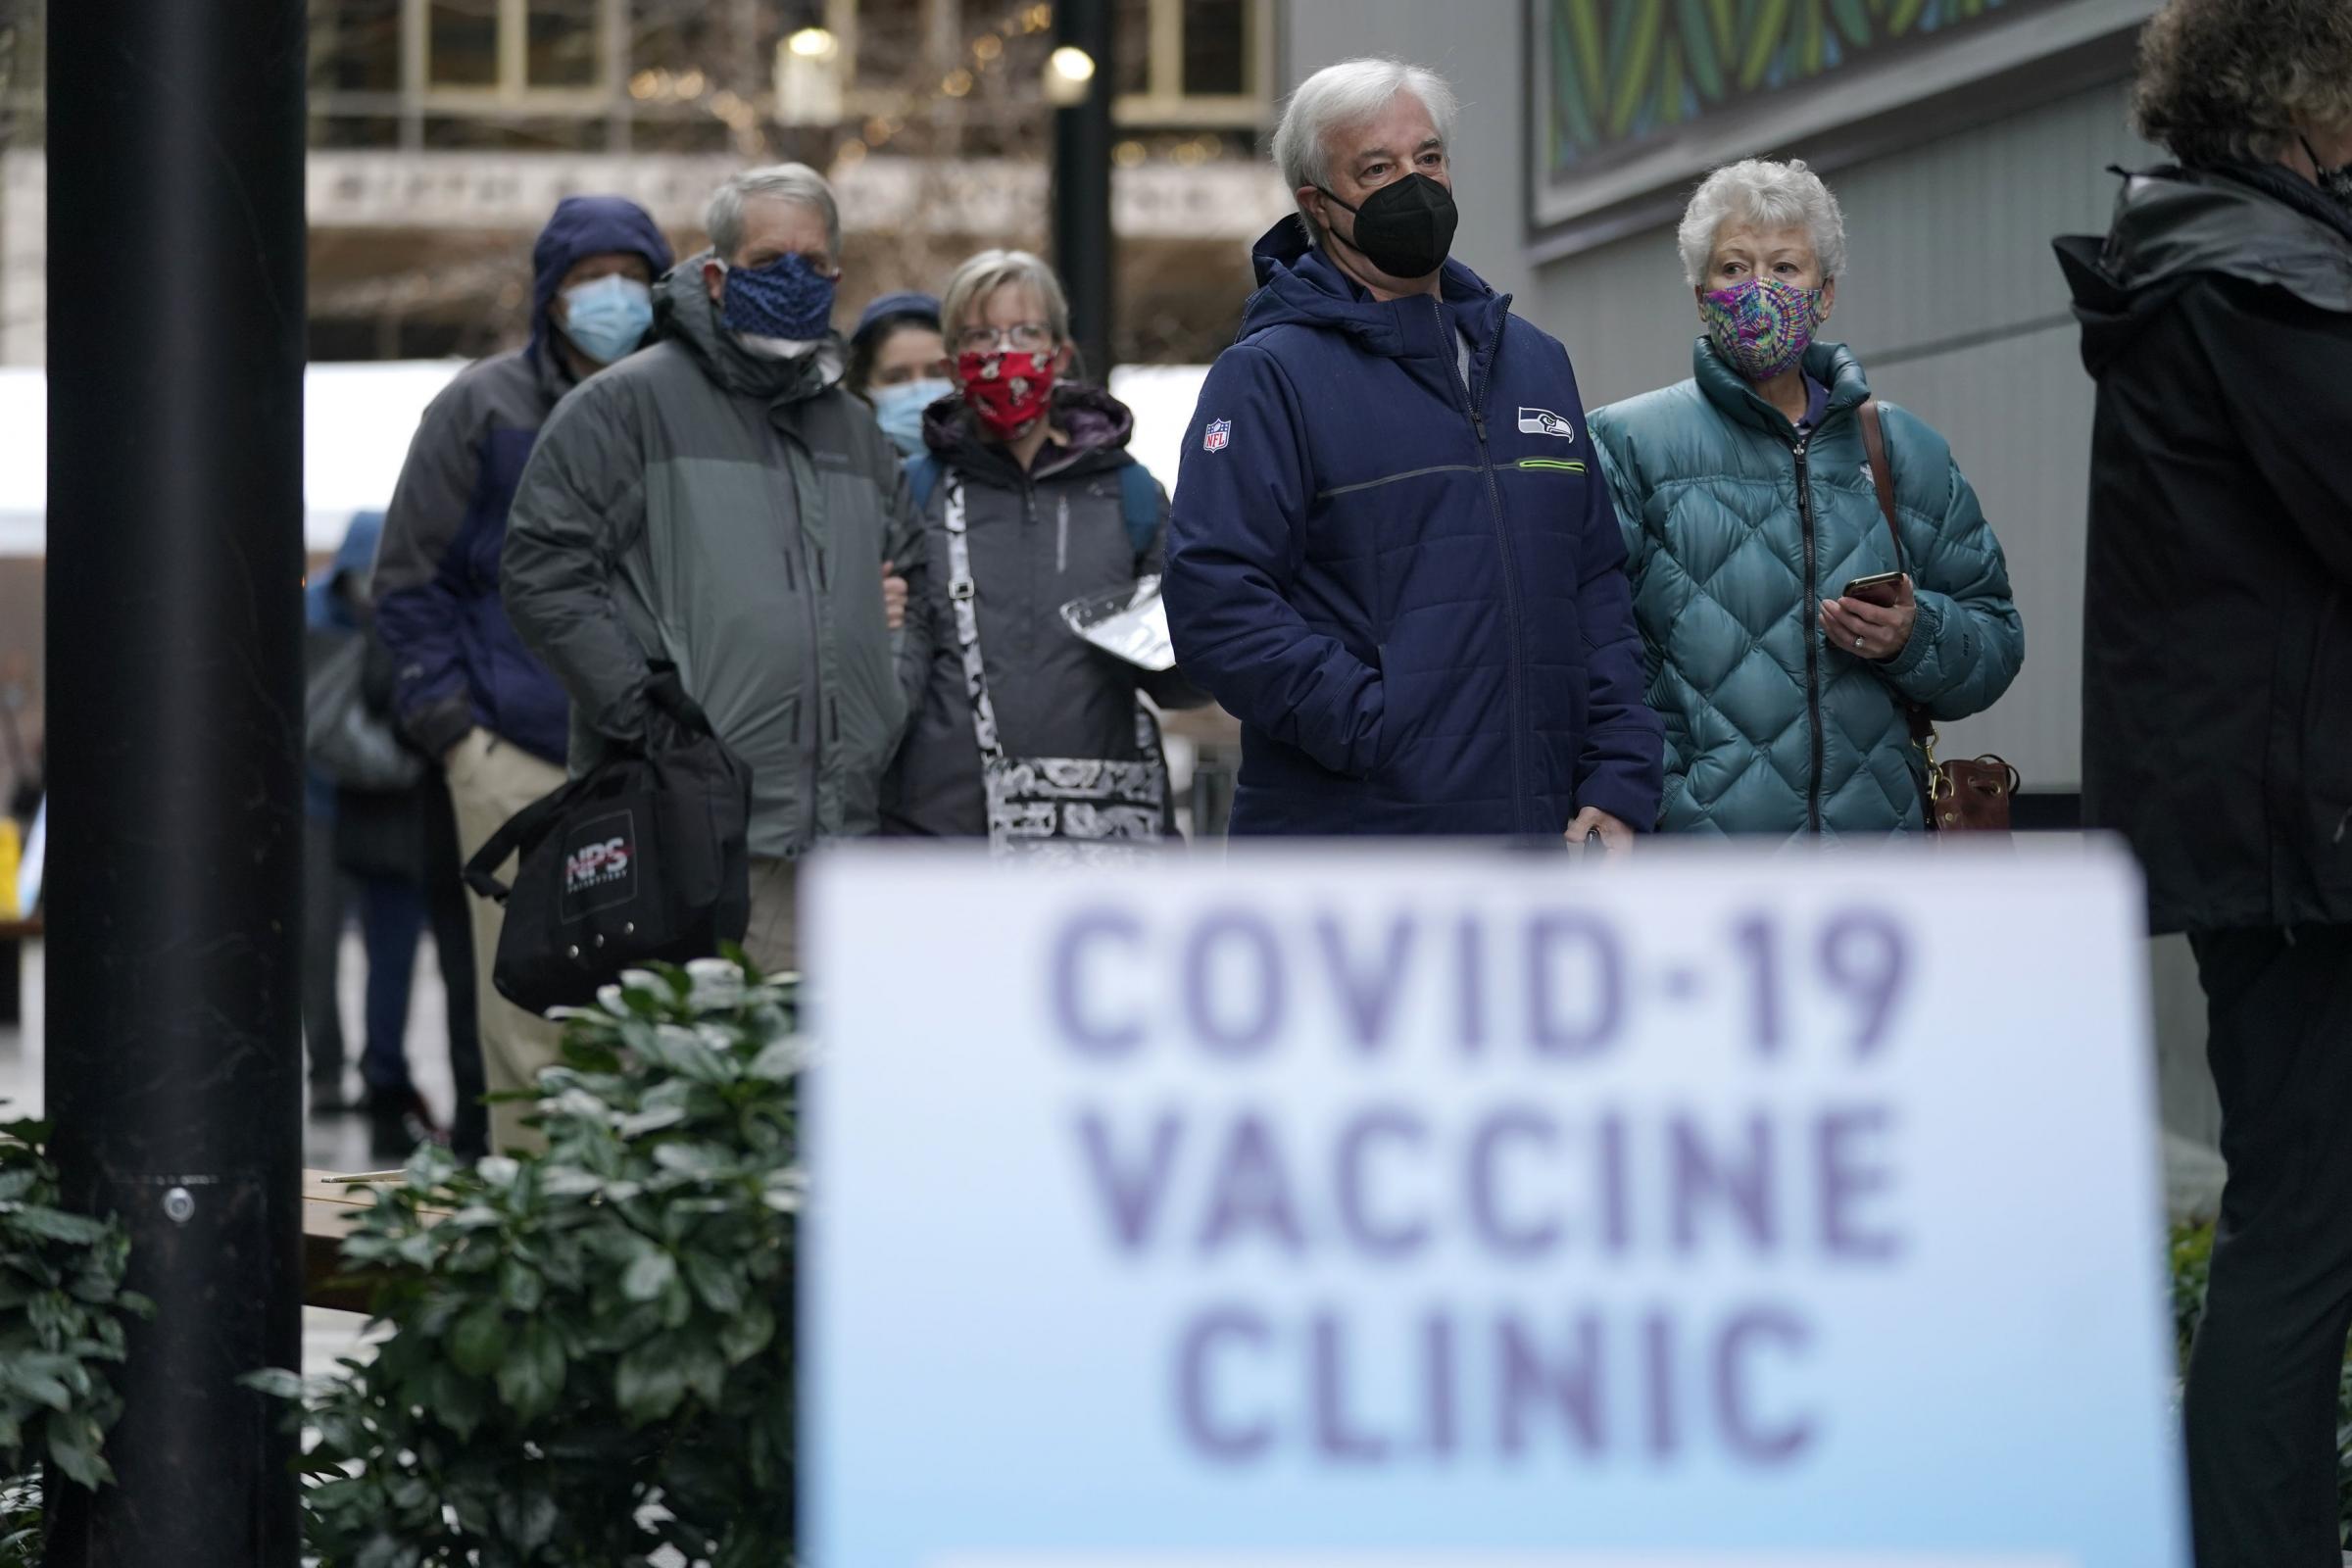 FILE - In this Jan. 24, 2021, file photo, people stand near a sign as they wait in line to receive the first of two doses of the Pfizer vaccine for COVID-19, at a one-day vaccination clinic set up in an Amazon.com facility in Seattle and operated by Virgi